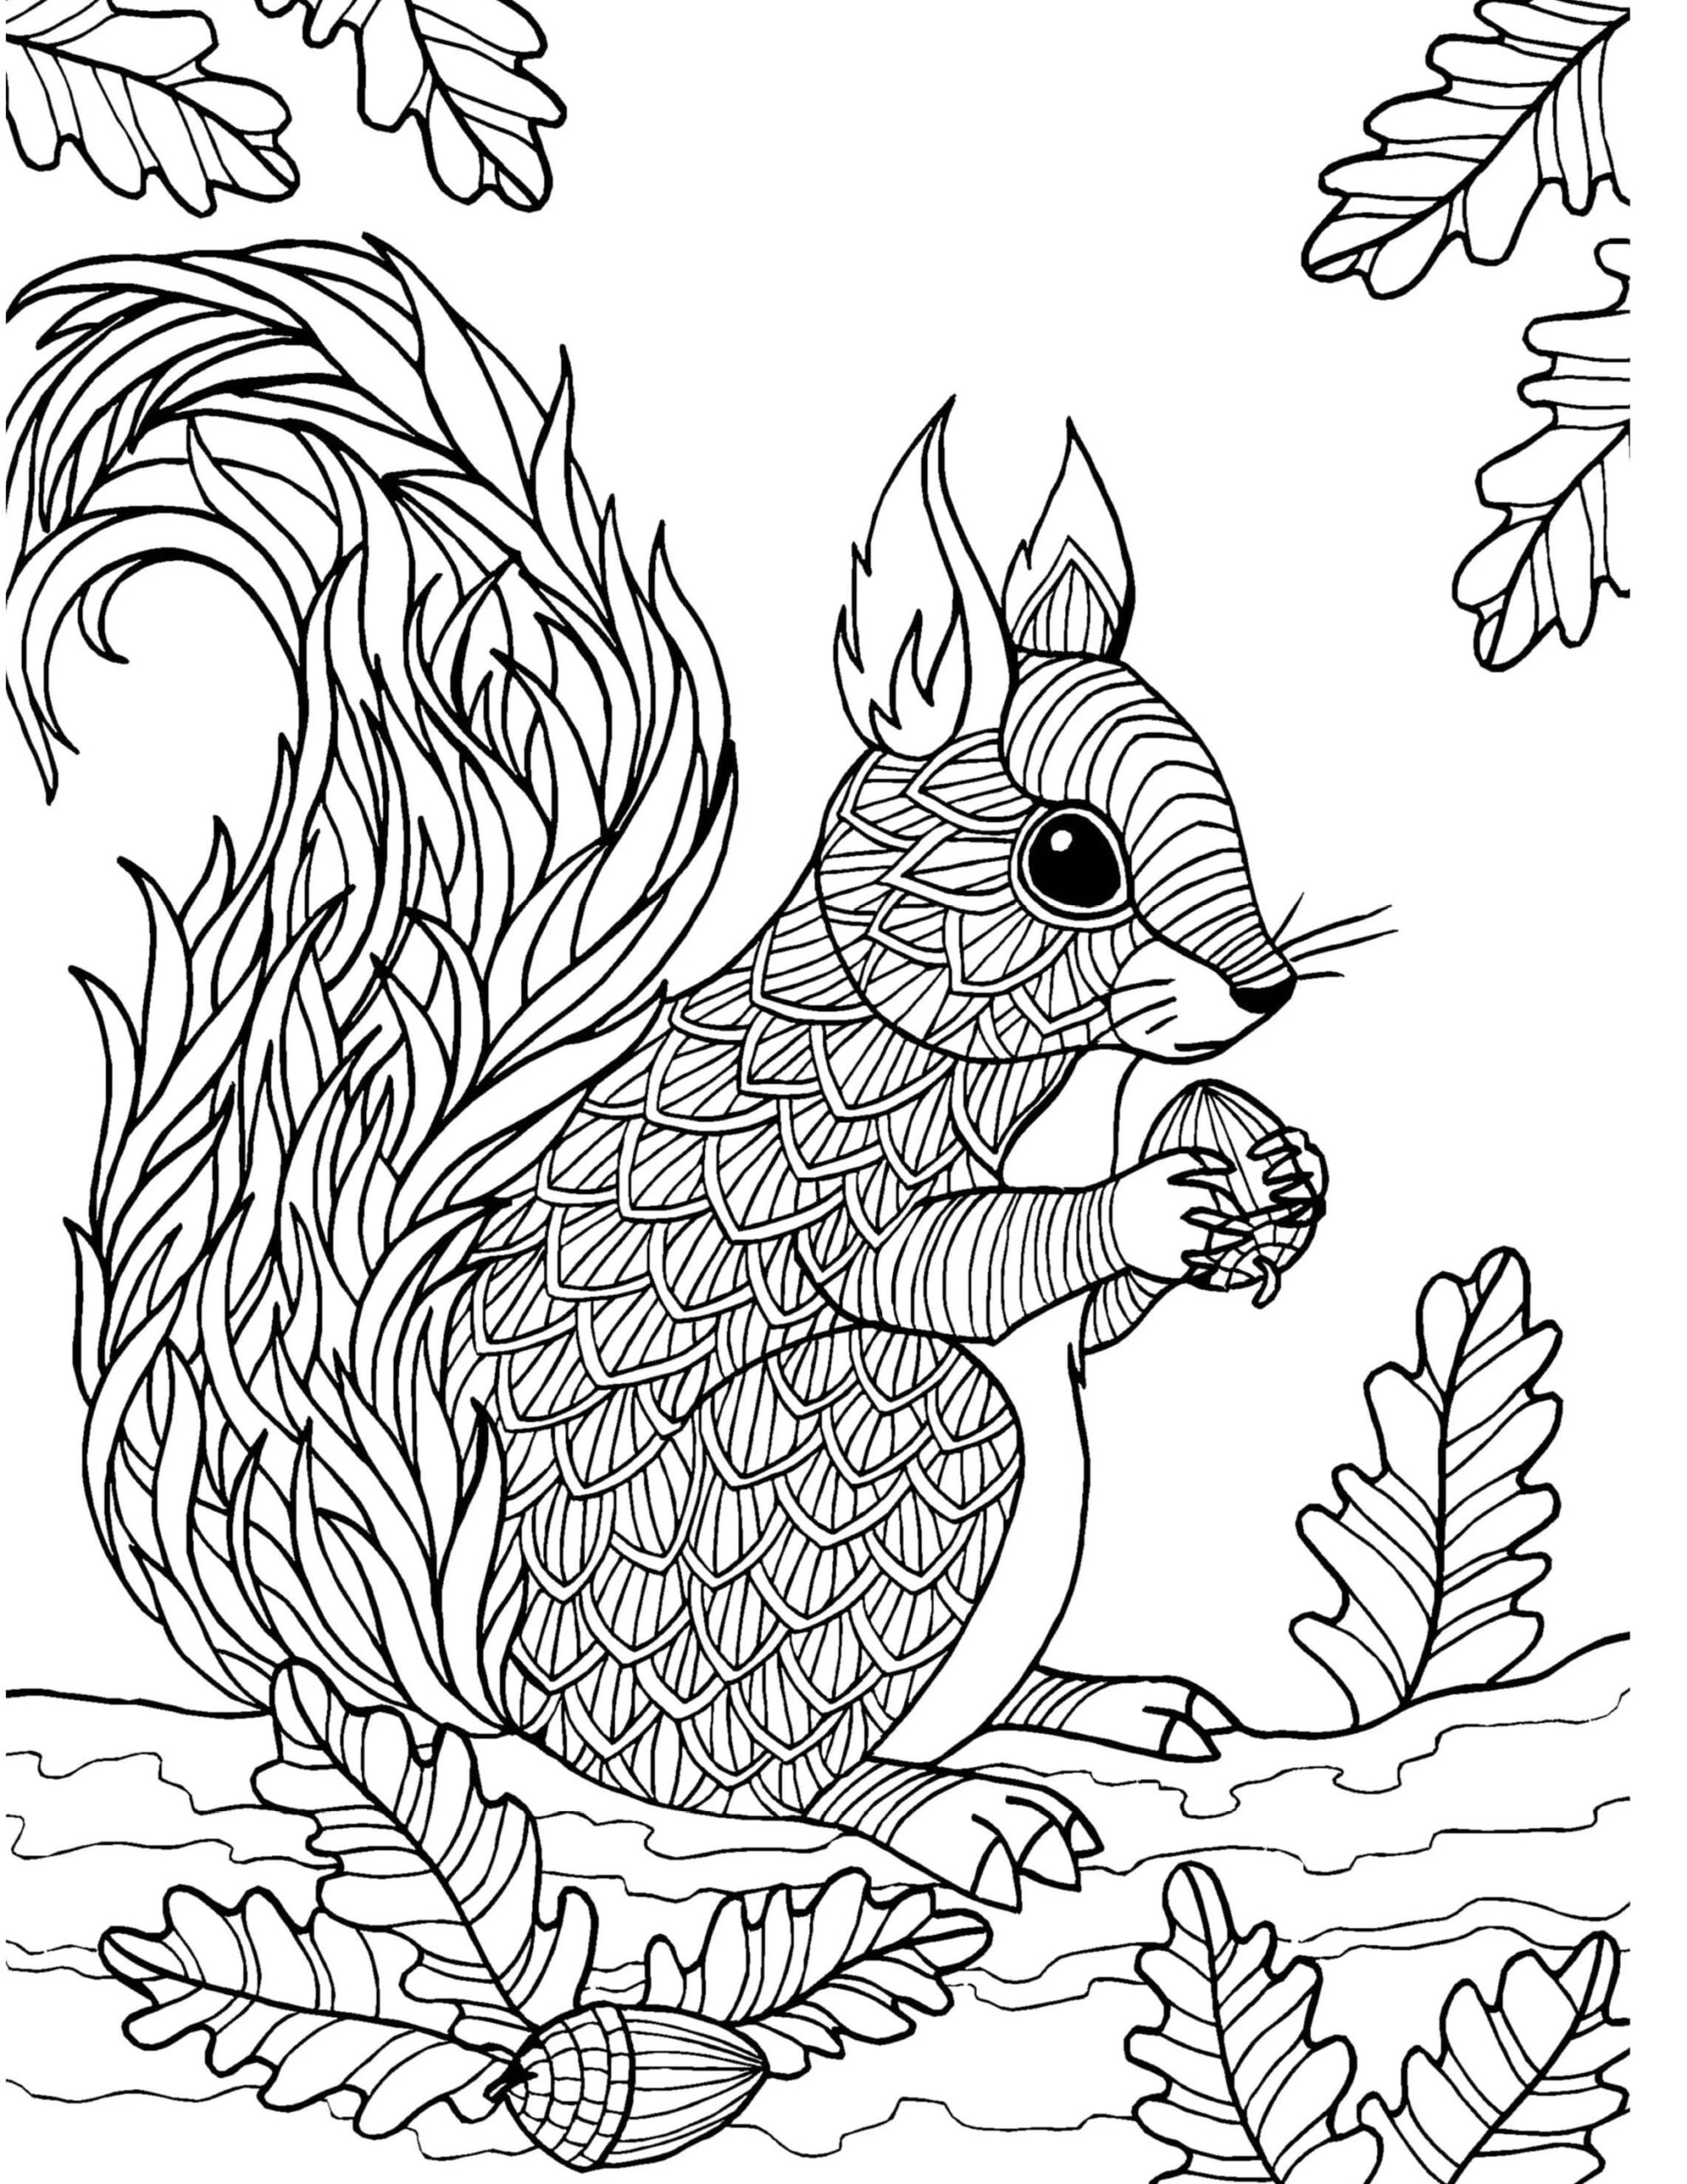 Fall Squirrel Coloring Page Coloring Pages | SexiezPicz Web Porn